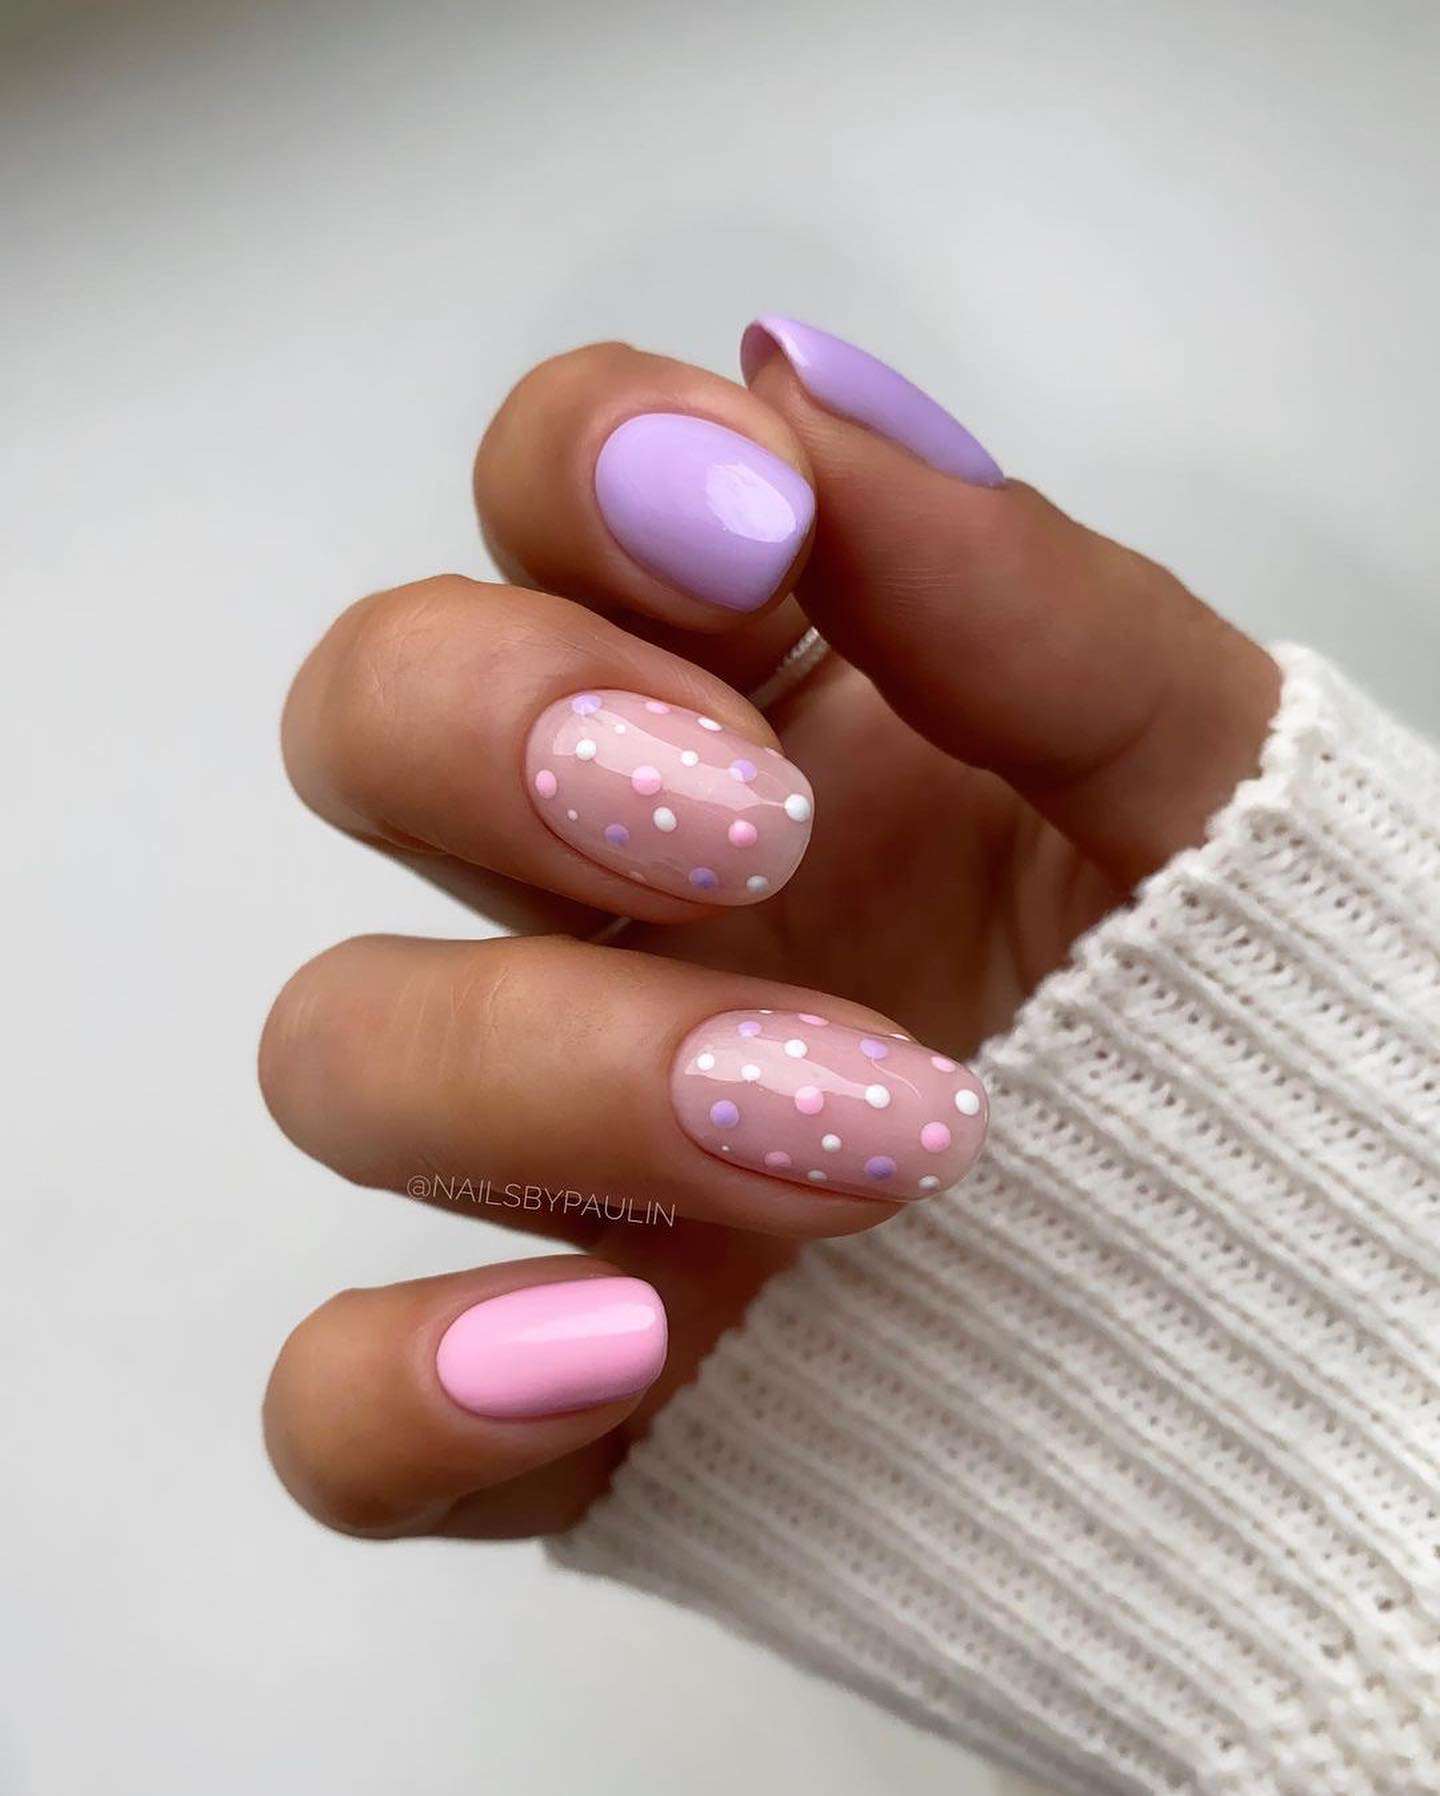 35 Nail Designs For 2022 You’ll Want To Try Immediately images 31